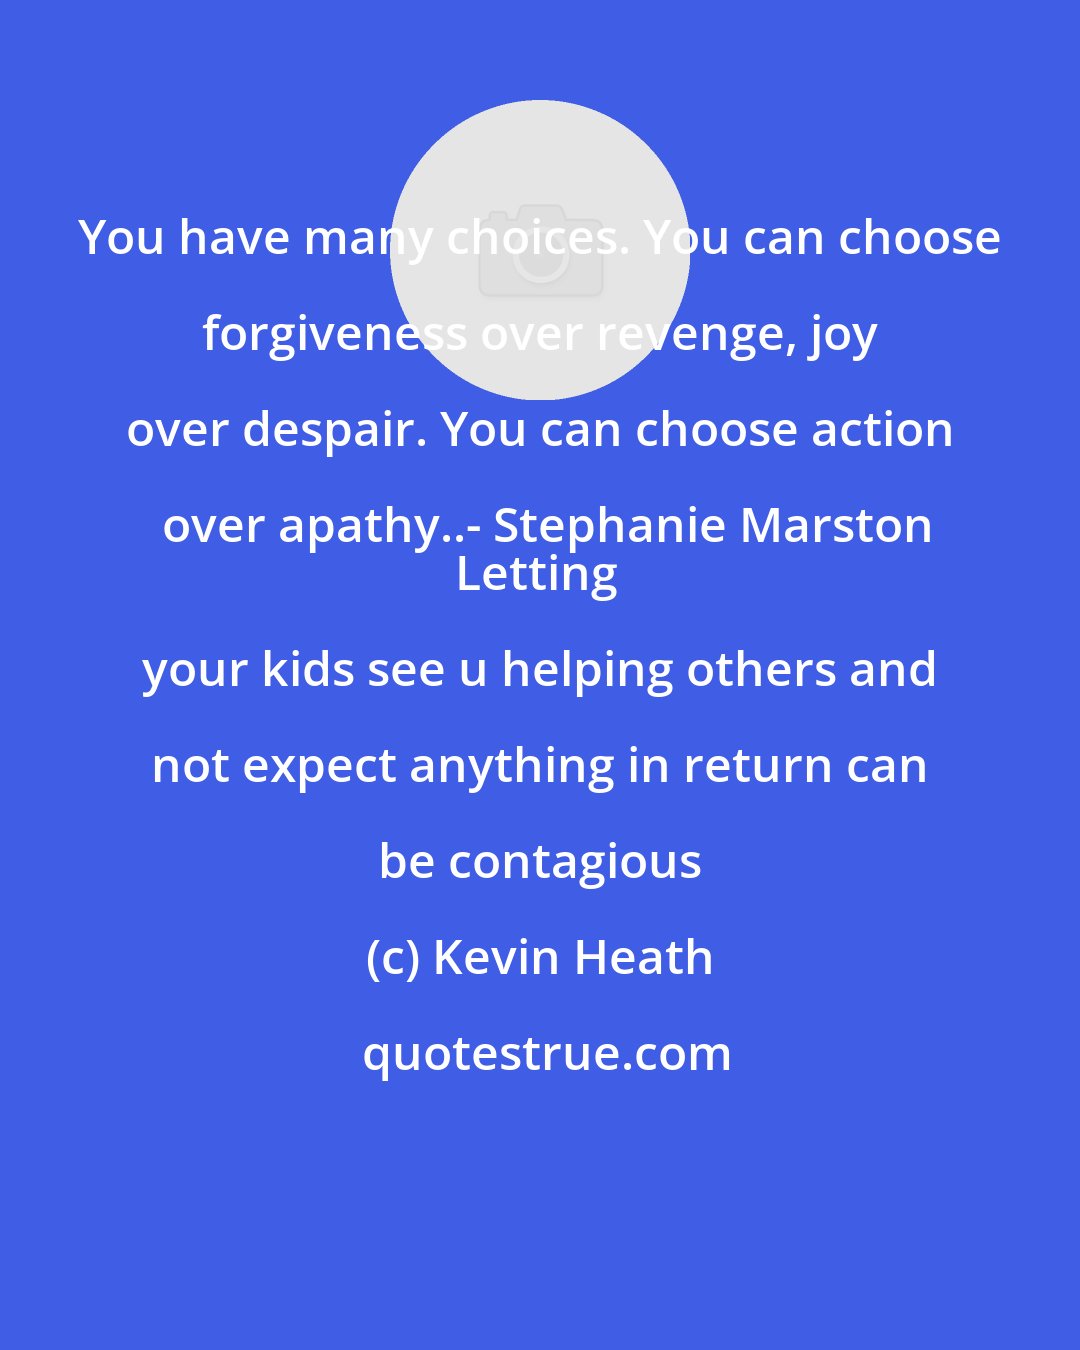 Kevin Heath: You have many choices. You can choose forgiveness over revenge, joy over despair. You can choose action over apathy..- Stephanie Marston
Letting your kids see u helping others and not expect anything in return can be contagious